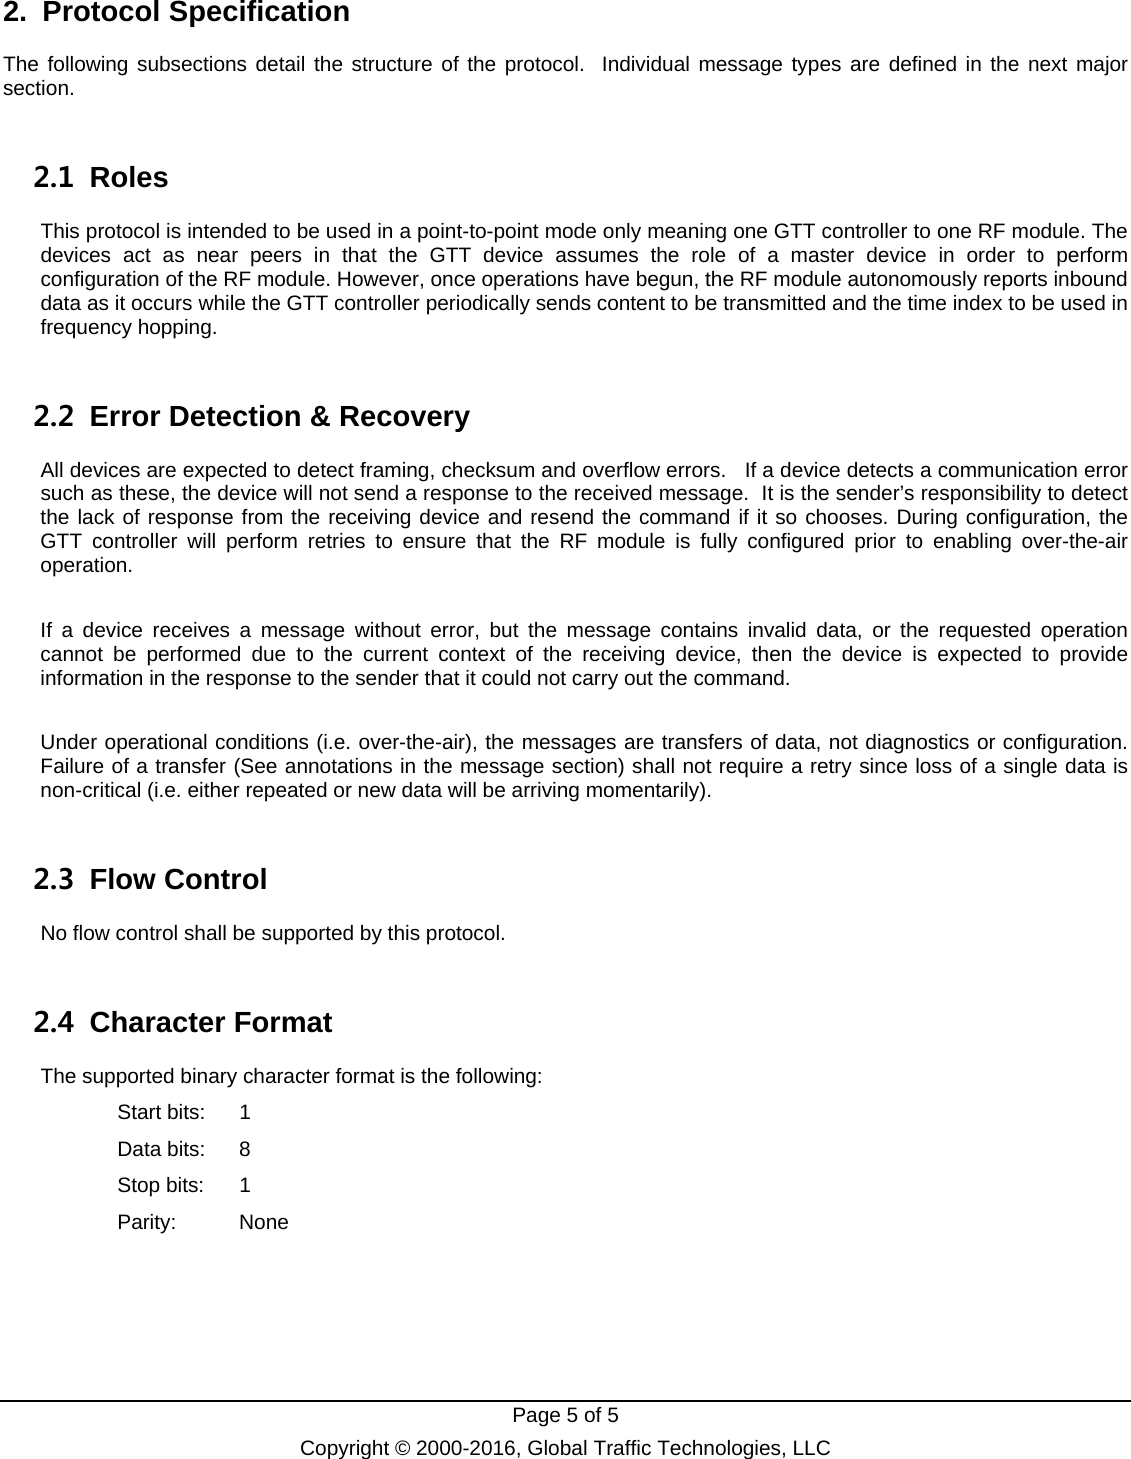   Page 5 of 5 Copyright © 2000-2016, Global Traffic Technologies, LLC 2. Protocol Specification The following subsections detail the structure of the protocol.  Individual message types are defined in the next major section. 2.1 Roles This protocol is intended to be used in a point-to-point mode only meaning one GTT controller to one RF module. The devices act as near peers in that the GTT device assumes the role of a master device in order to perform configuration of the RF module. However, once operations have begun, the RF module autonomously reports inbound data as it occurs while the GTT controller periodically sends content to be transmitted and the time index to be used in frequency hopping.   2.2  Error Detection &amp; Recovery All devices are expected to detect framing, checksum and overflow errors.   If a device detects a communication error such as these, the device will not send a response to the received message.  It is the sender’s responsibility to detect the lack of response from the receiving device and resend the command if it so chooses. During configuration, the GTT controller will perform retries to ensure that the RF module is fully configured prior to enabling over-the-air operation.  If a device receives a message without error, but the message contains invalid data, or the requested operation cannot be performed due to the current context of the receiving device, then the device is expected to provide information in the response to the sender that it could not carry out the command.    Under operational conditions (i.e. over-the-air), the messages are transfers of data, not diagnostics or configuration. Failure of a transfer (See annotations in the message section) shall not require a retry since loss of a single data is non-critical (i.e. either repeated or new data will be arriving momentarily). 2.3 Flow Control No flow control shall be supported by this protocol.   2.4 Character Format The supported binary character format is the following: Start bits:  1 Data bits:  8 Stop bits:  1 Parity: None    